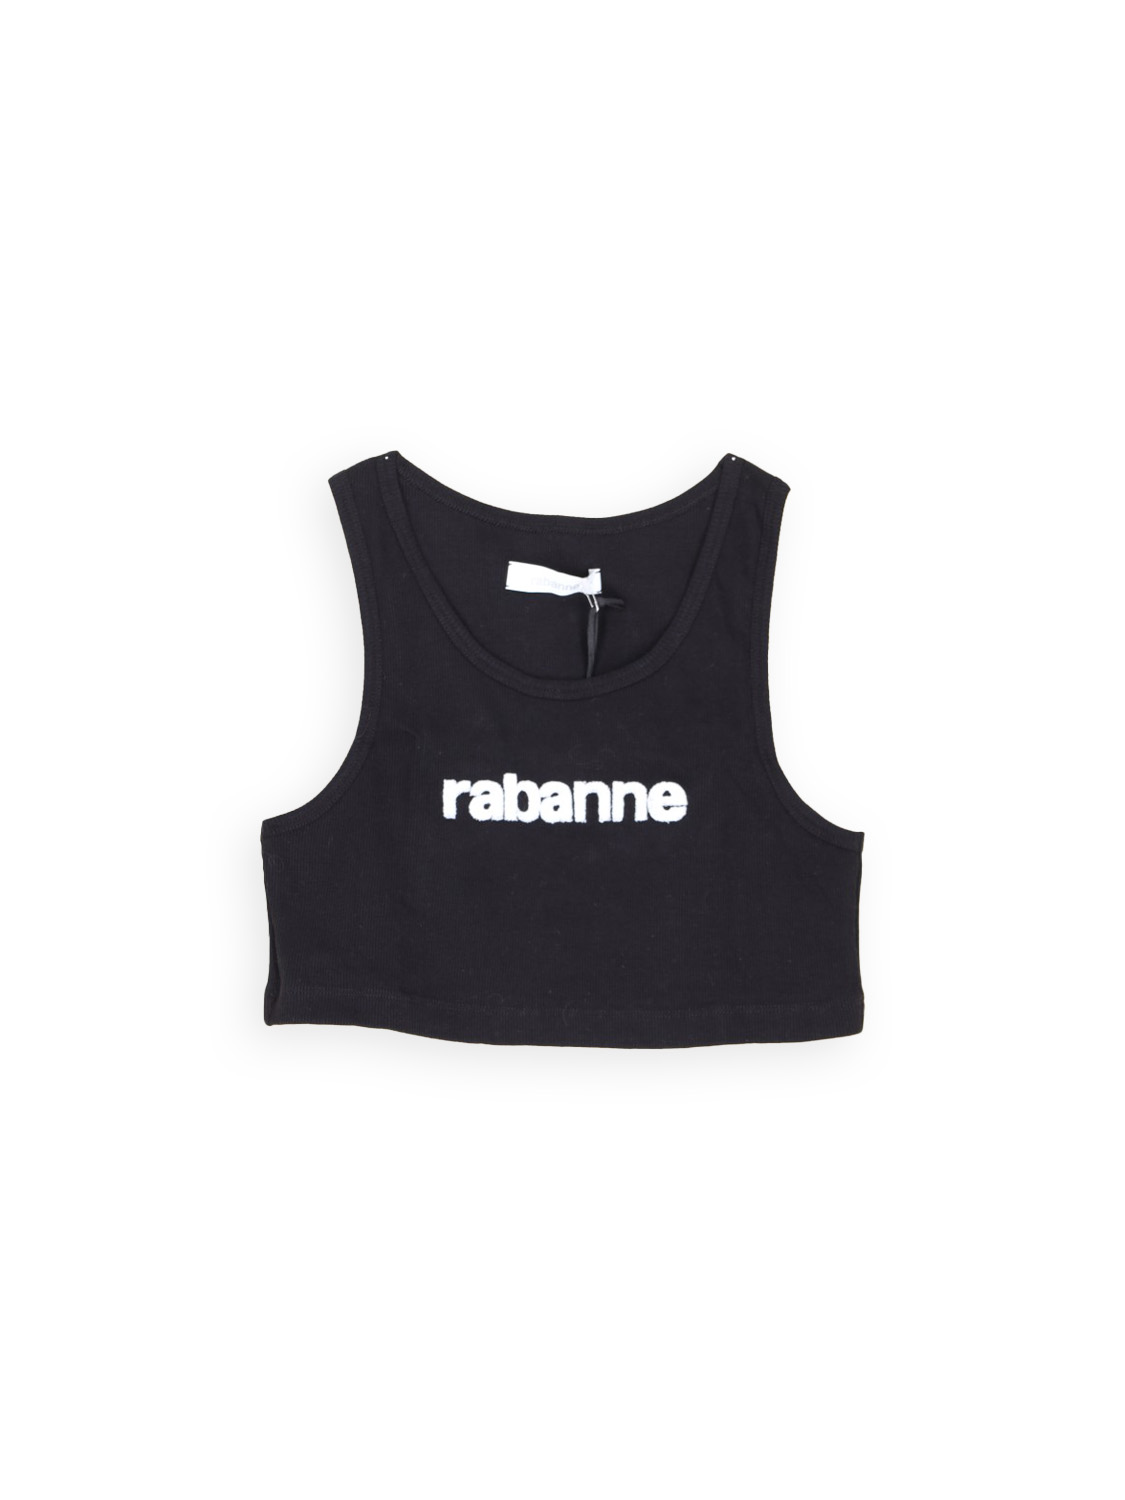 rabanne Cropped Tanktop with lableprint  black XS